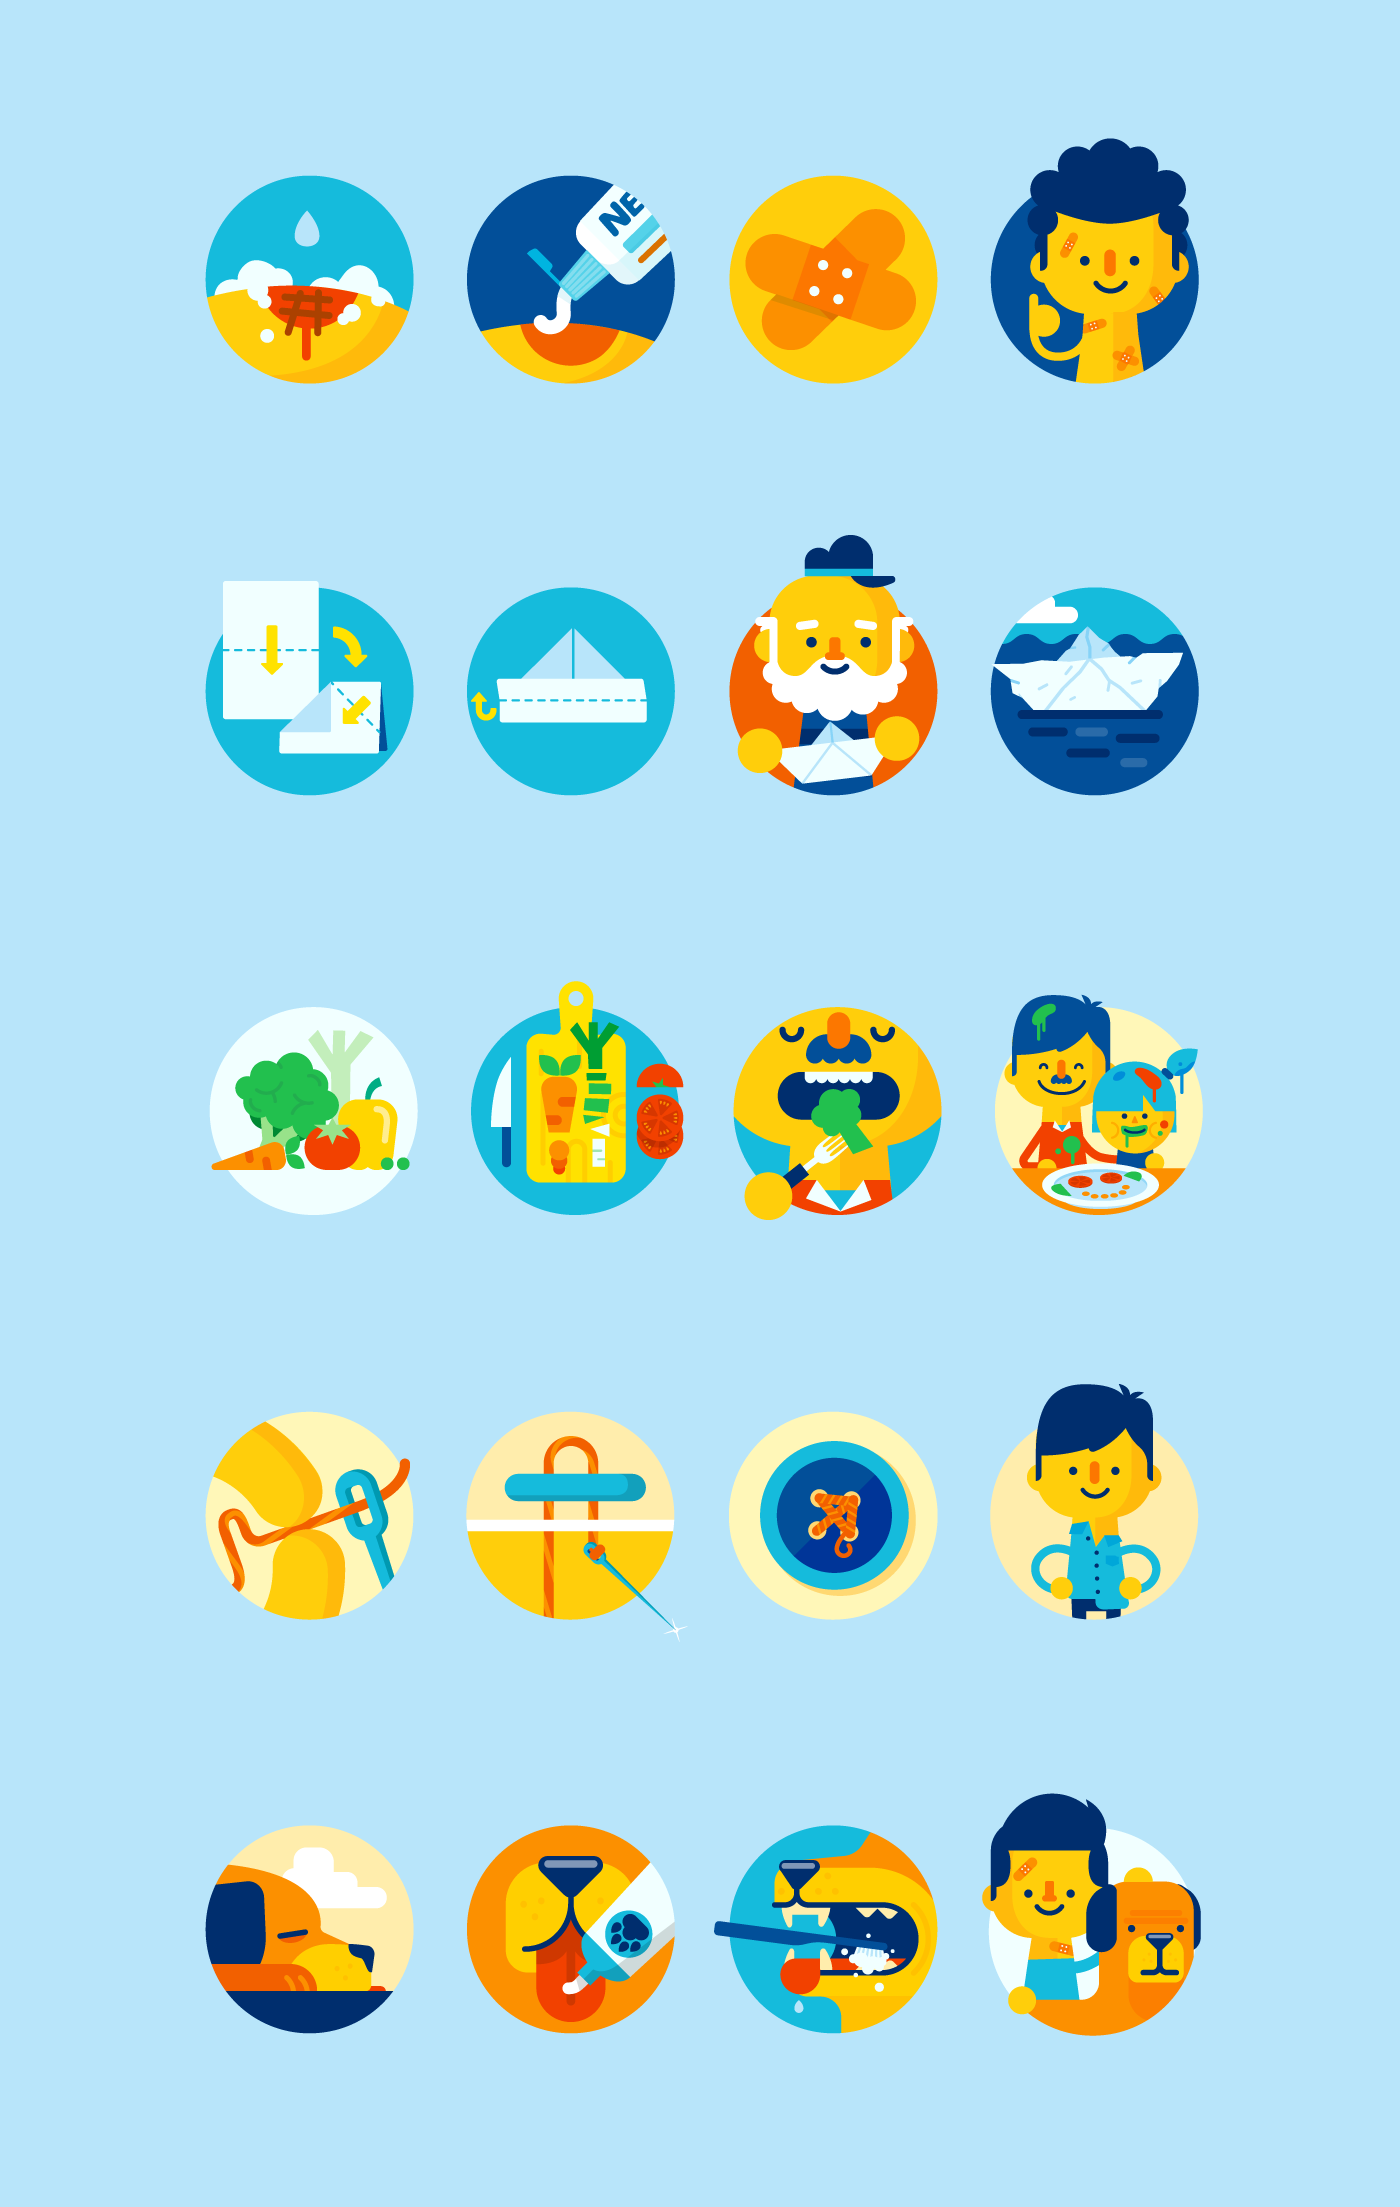 patswerk vector Character Bike dog Sailor cooking colorful Fun flat design flat Icon icons motion